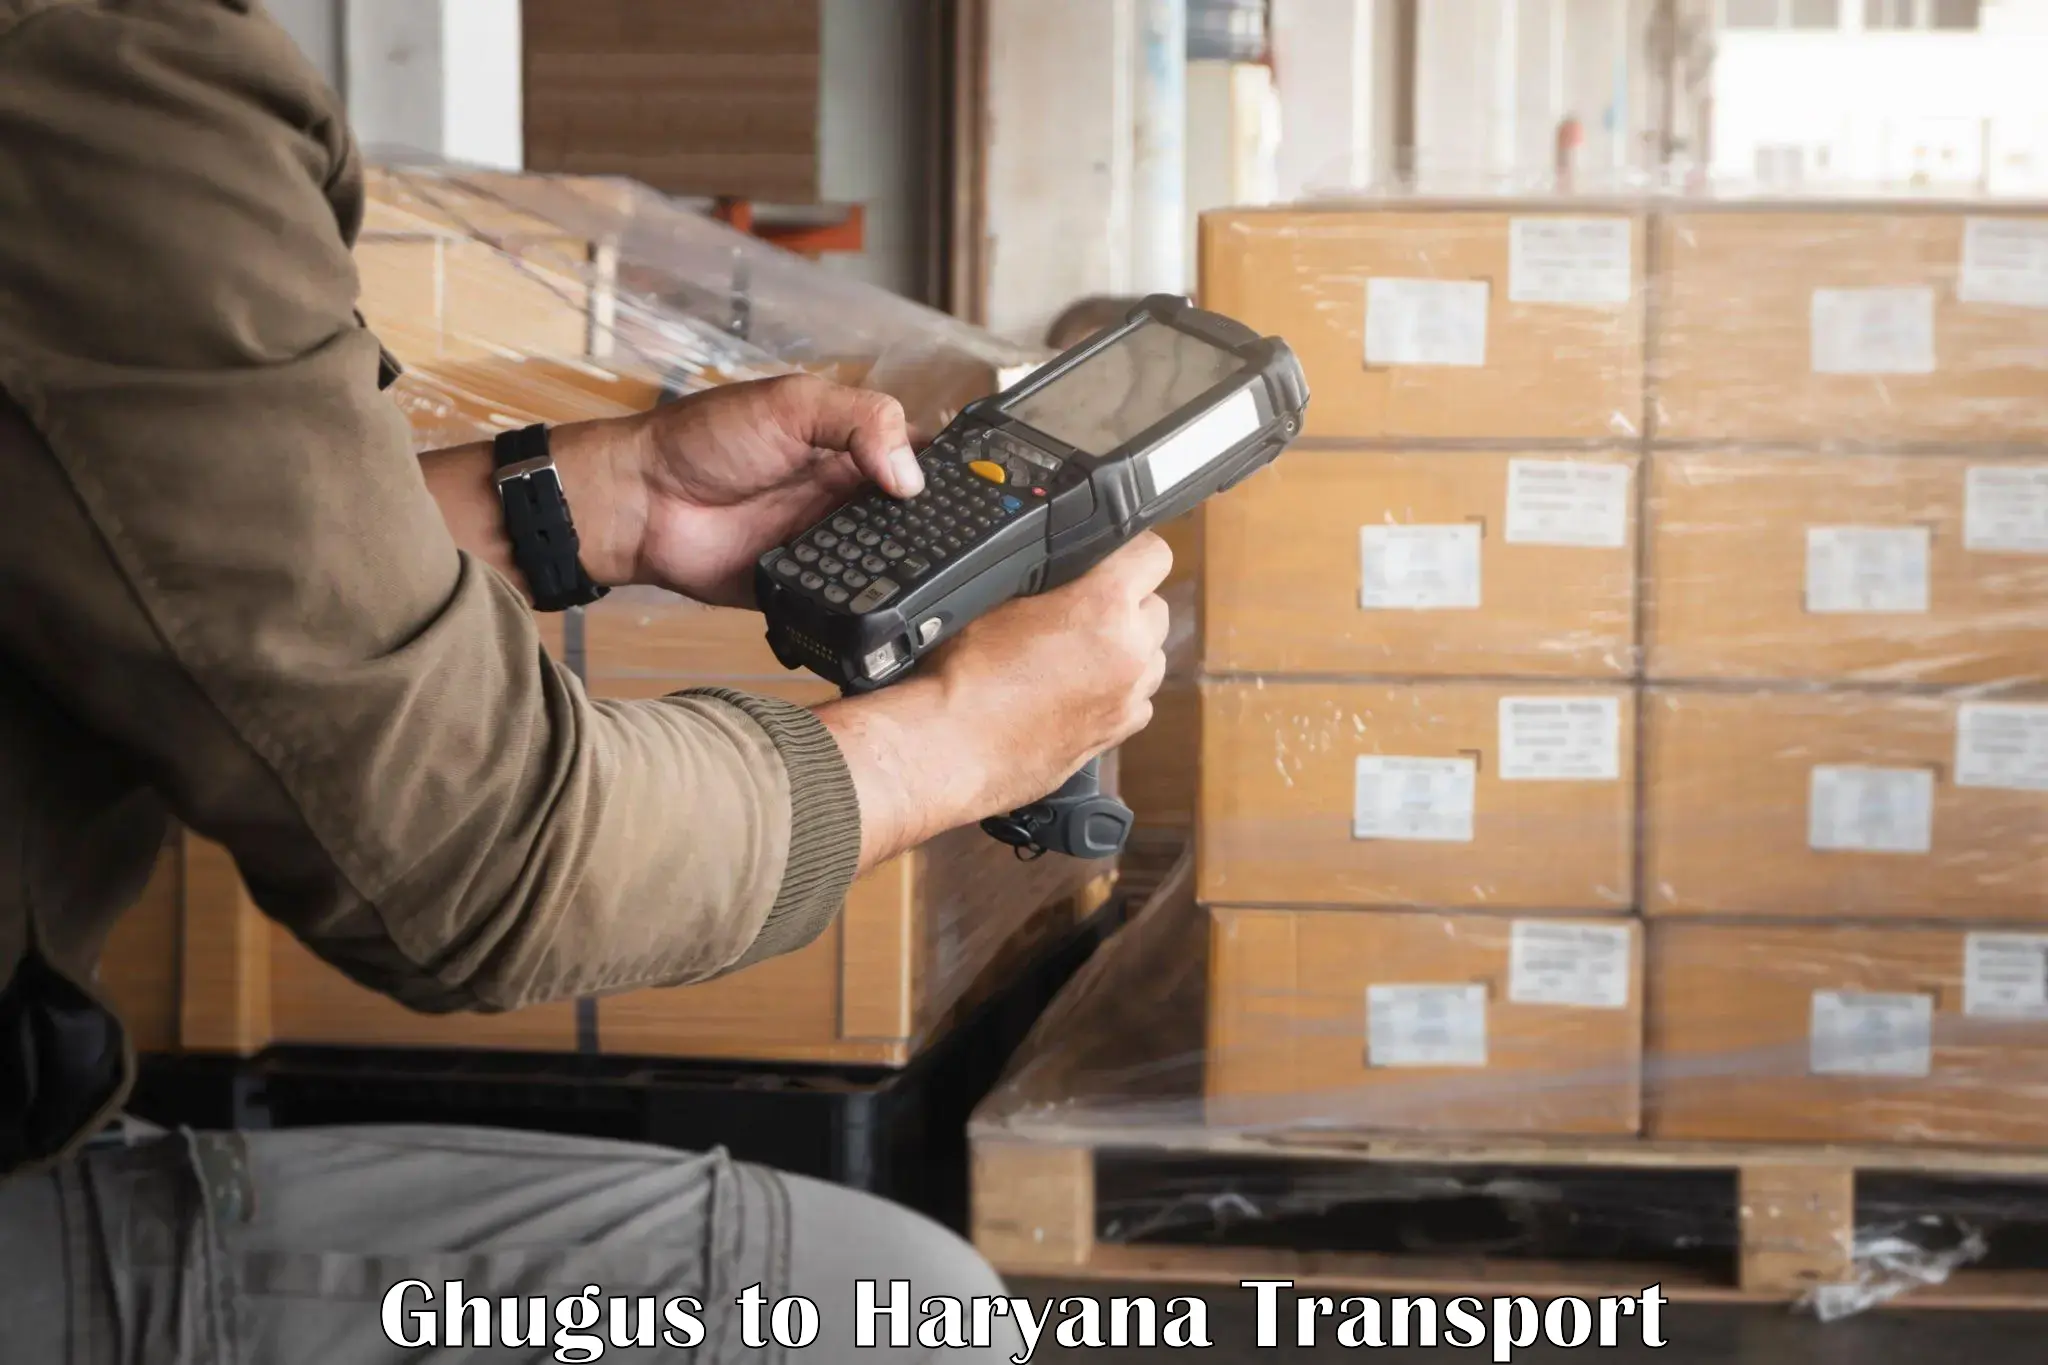 Commercial transport service Ghugus to Haryana